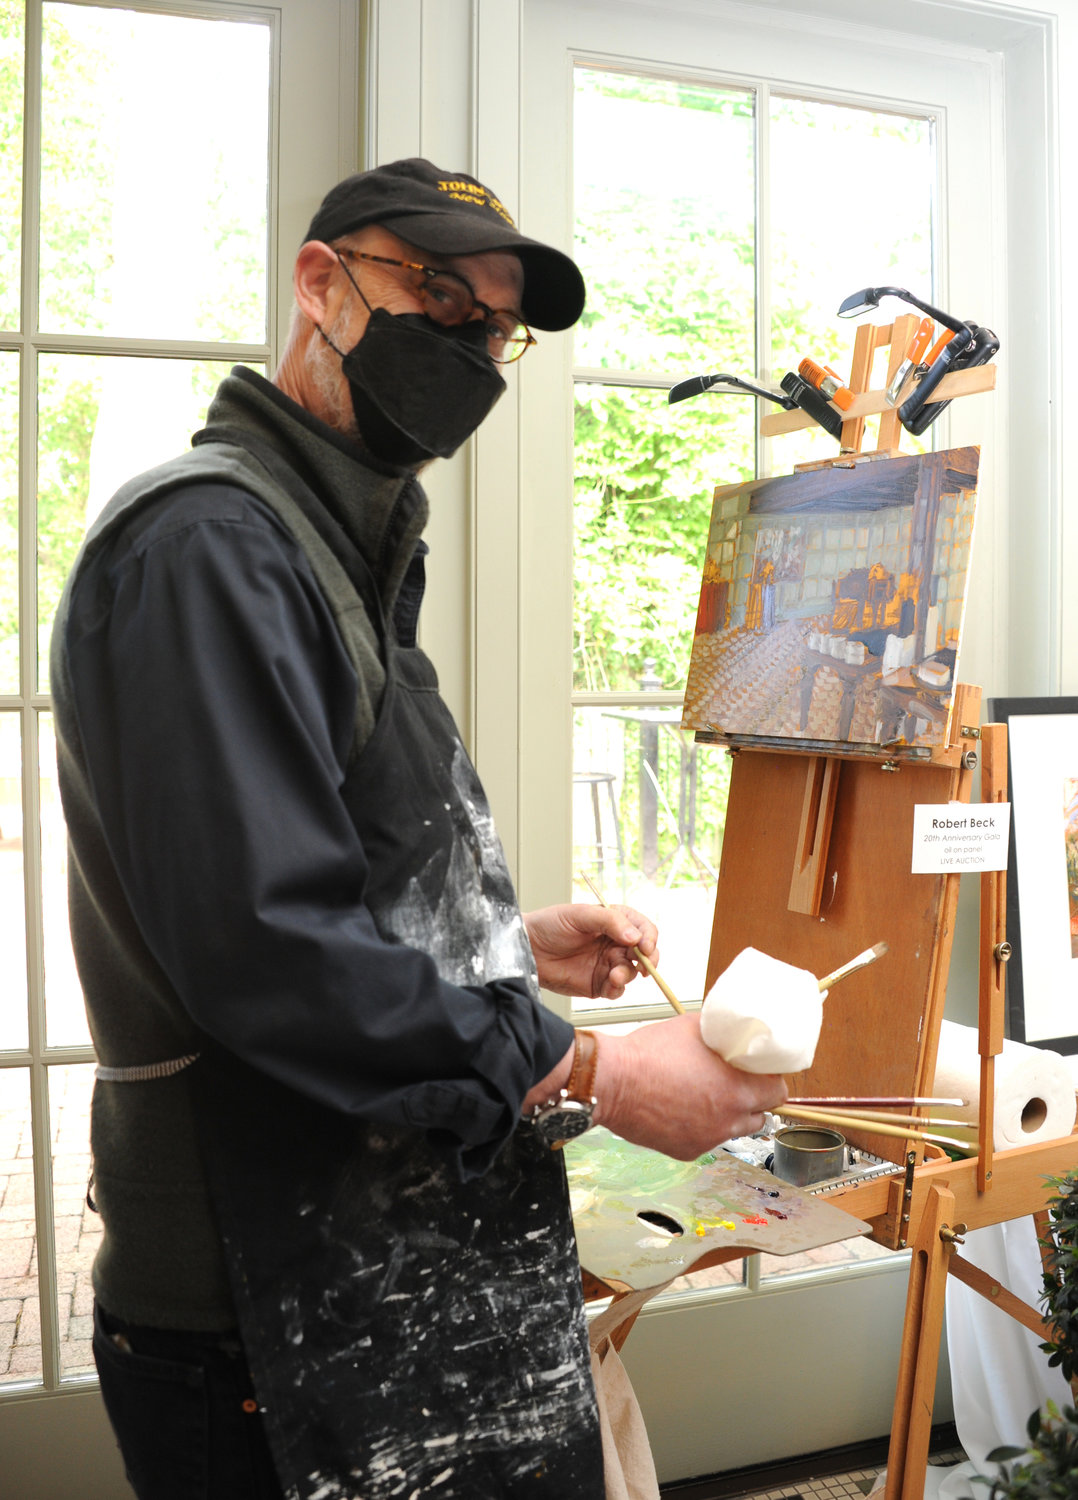 Robert Beck paints an art piece to be auctioned off for the event.